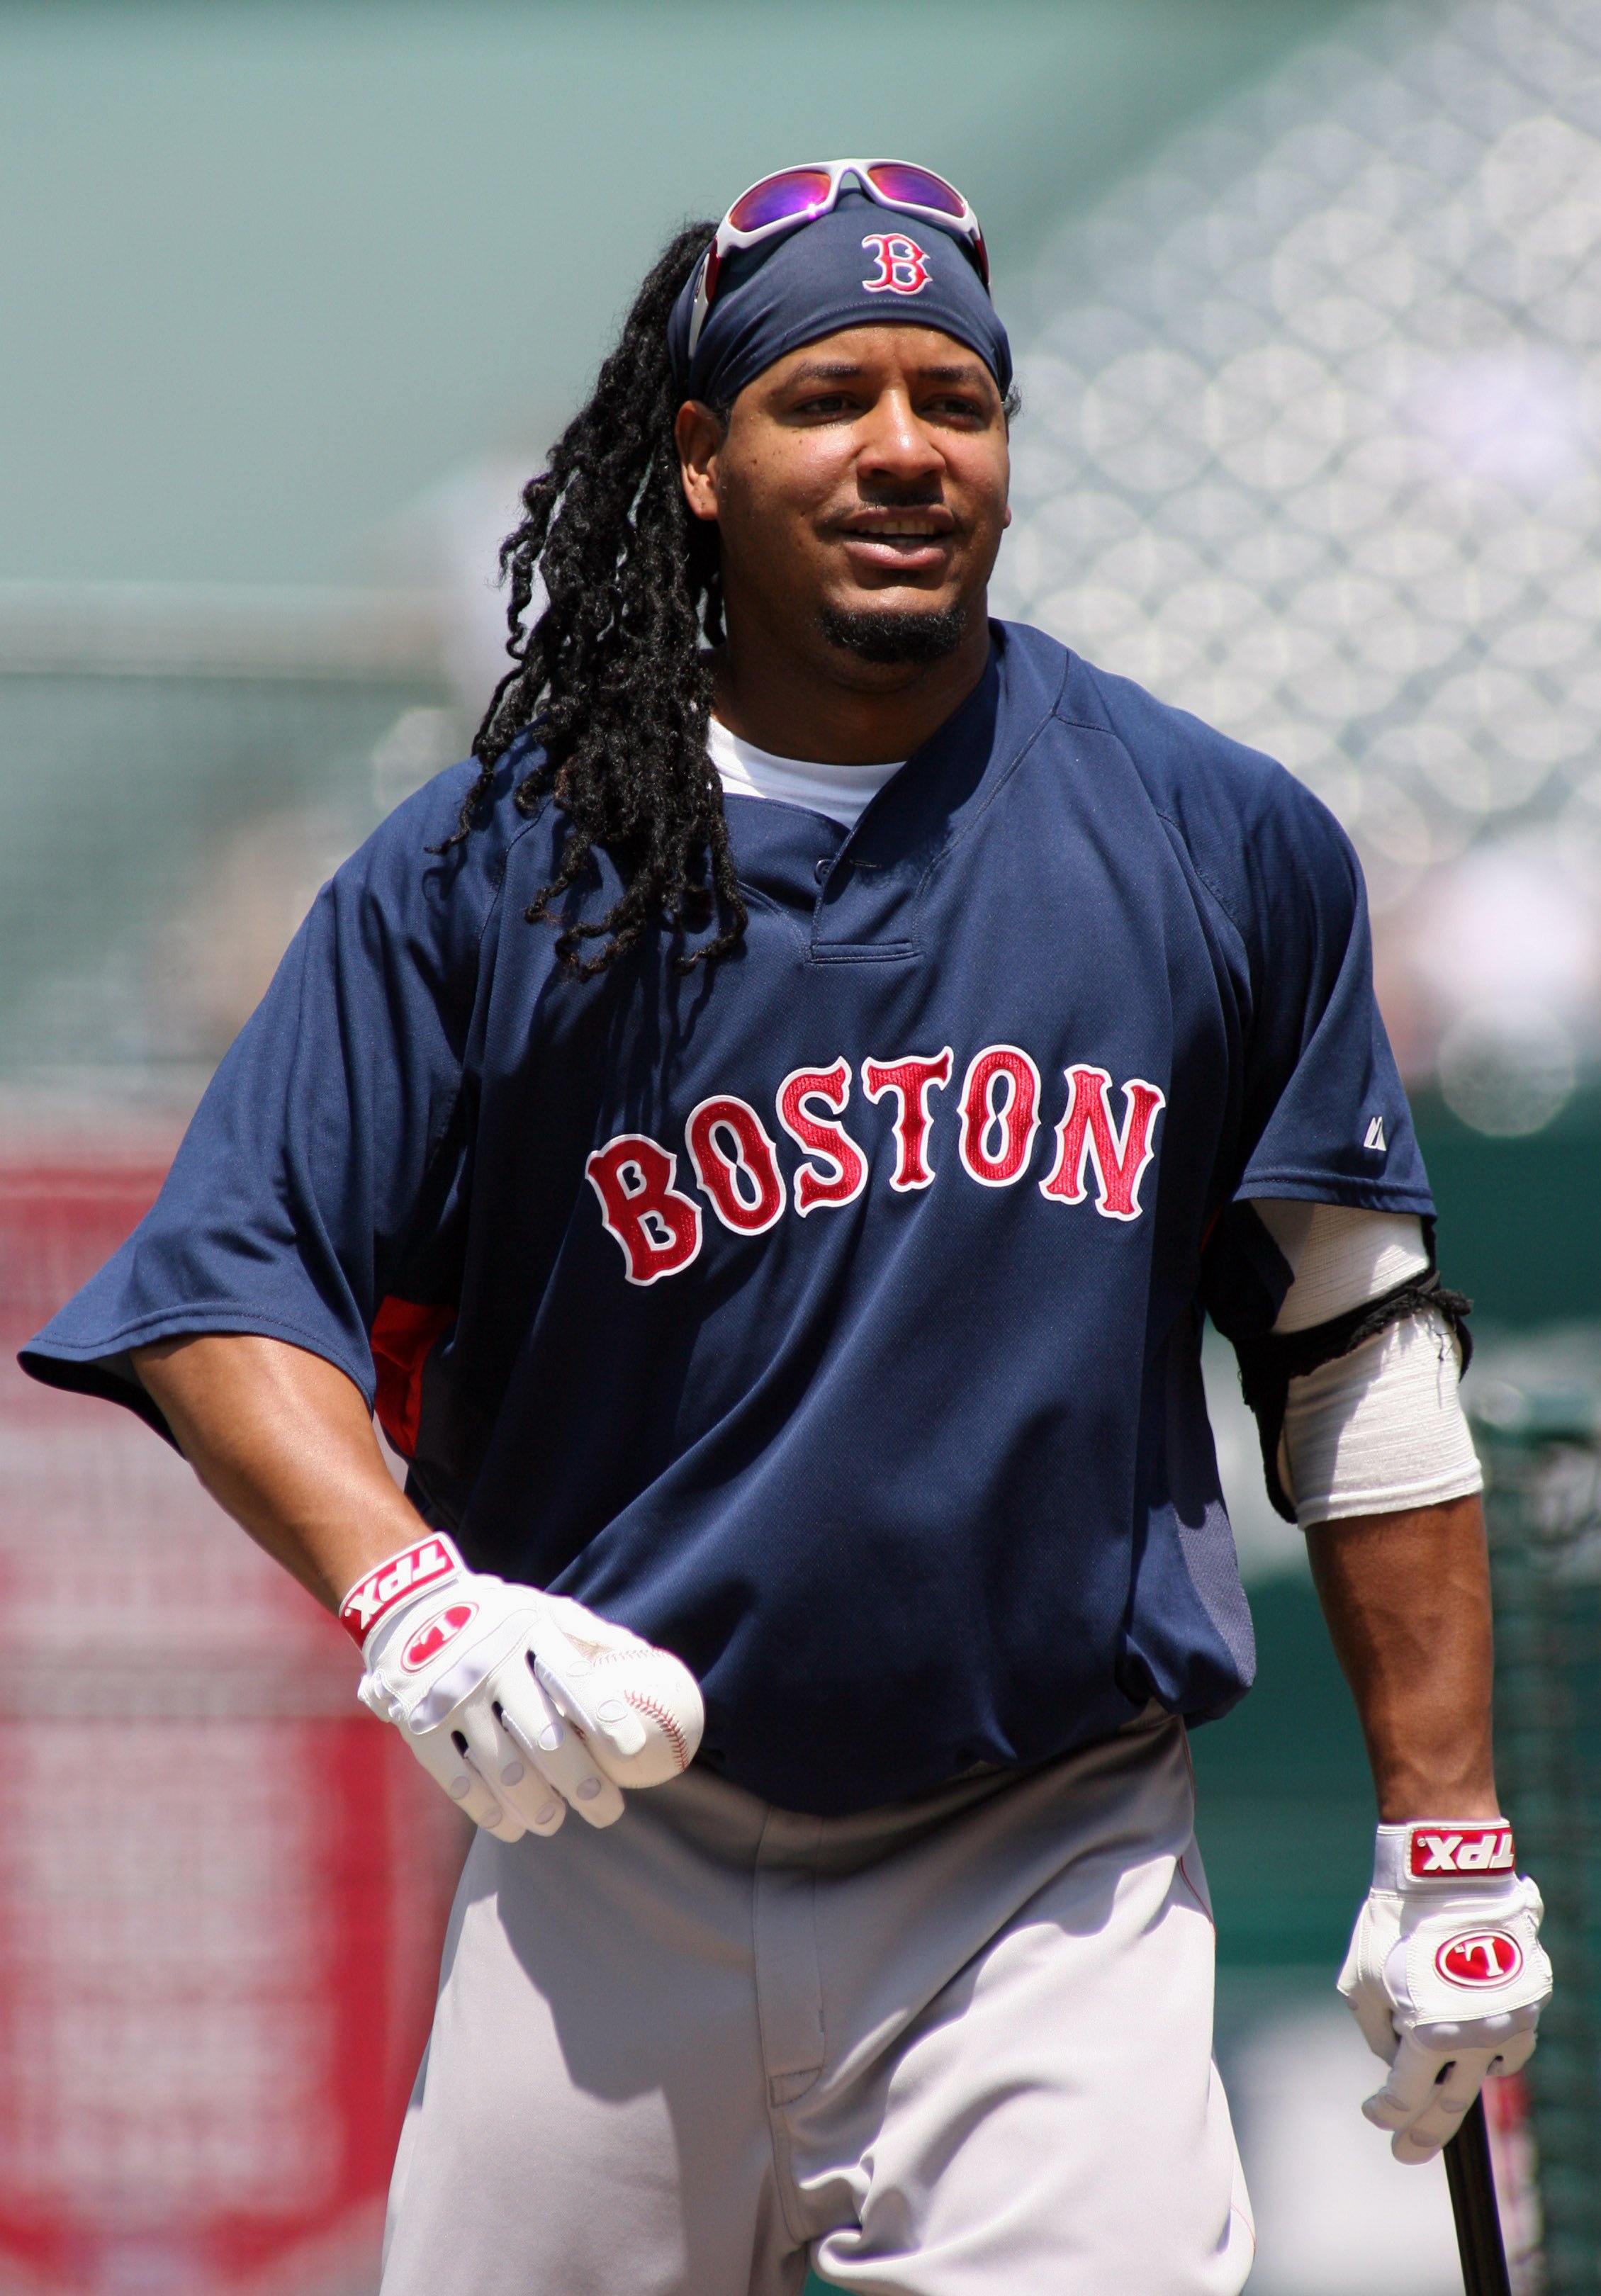 ANAHEIM, CA - JULY 20:  Manny Ramirez #24 of the Boston Red Sox walks with a bat and ball during practice before the game against the Los Angeles Angels of Anaheim at Angels Stadium on July 20, 2008 in Anaheim, California.  (Photo by Christian Petersen/Ge